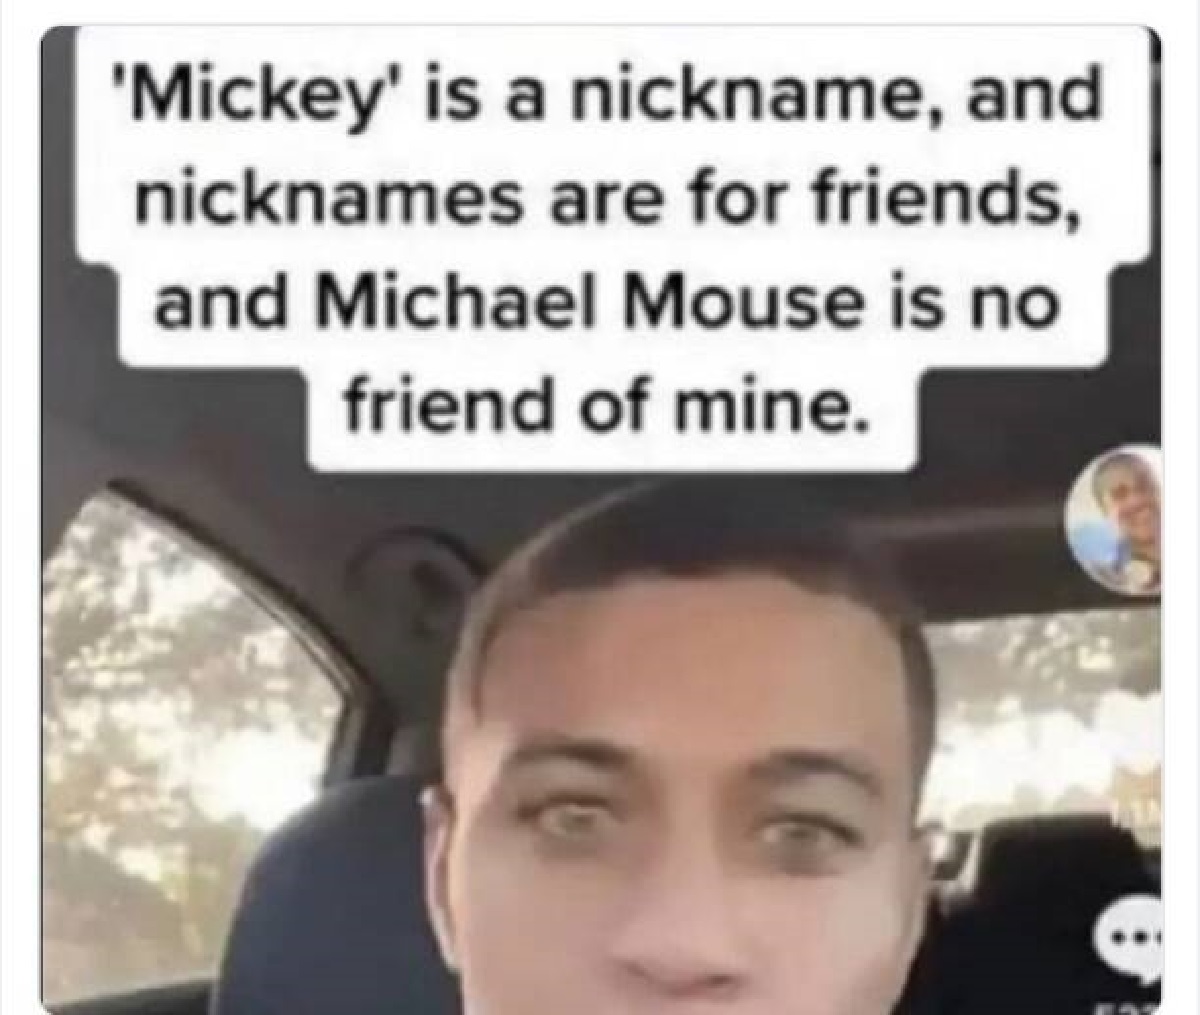 photo caption - 'Mickey' is a nickname, and nicknames are for friends, and Michael Mouse is no friend of mine.